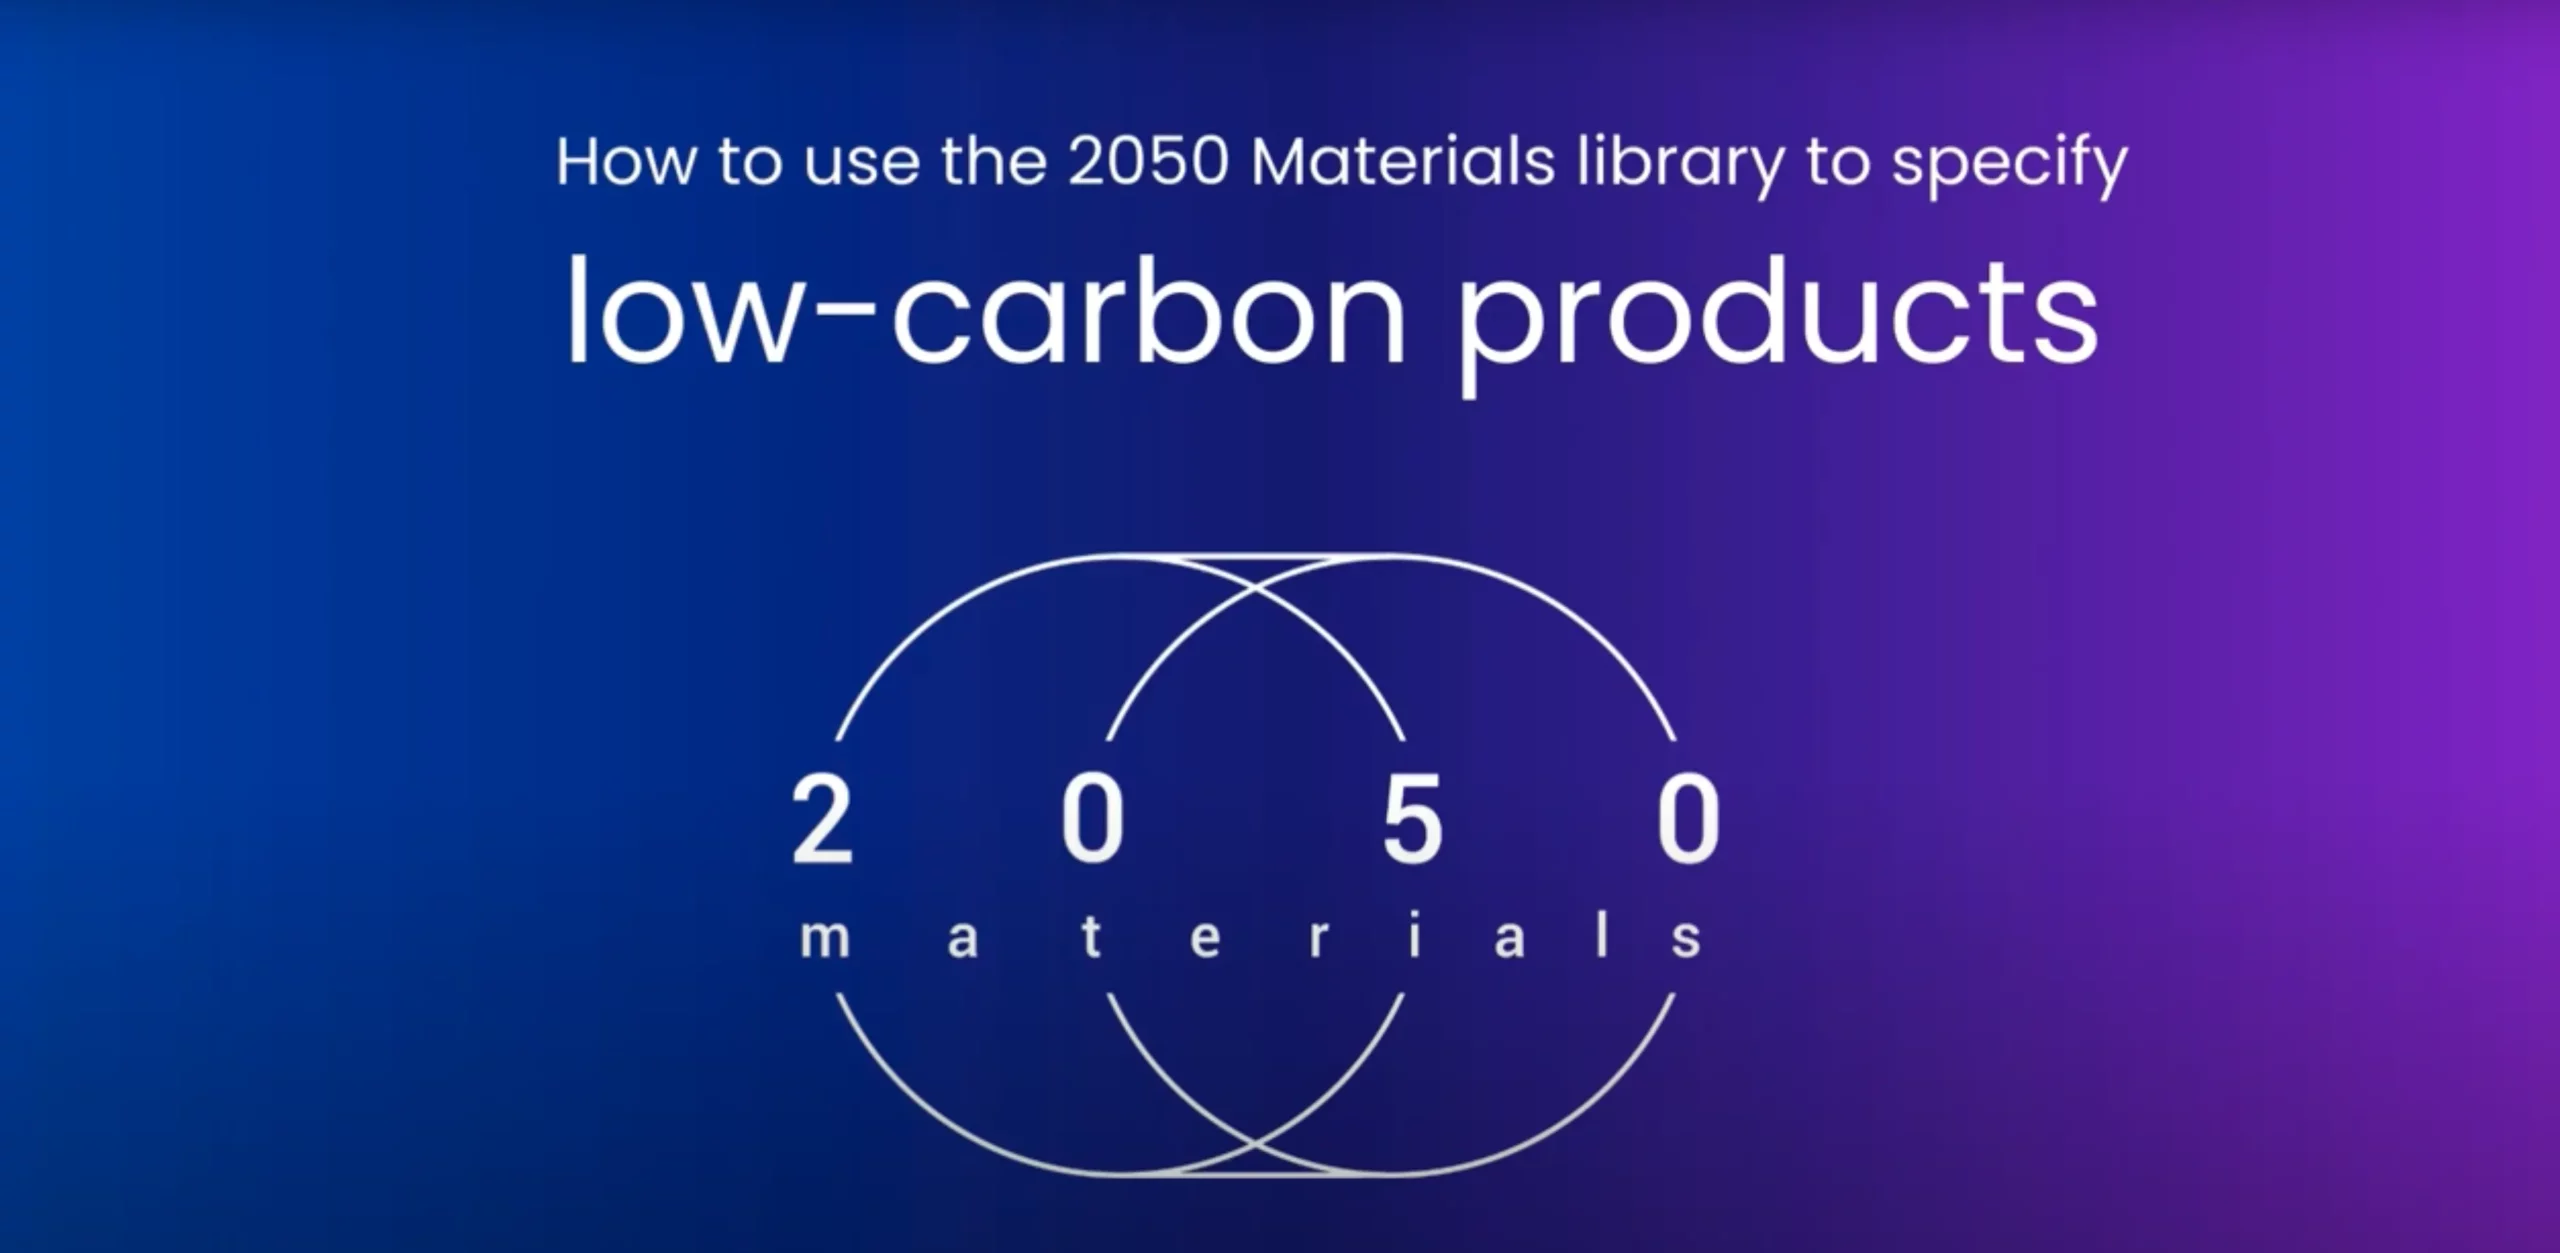 How to use the 2050 materials library to specify low-carbon products